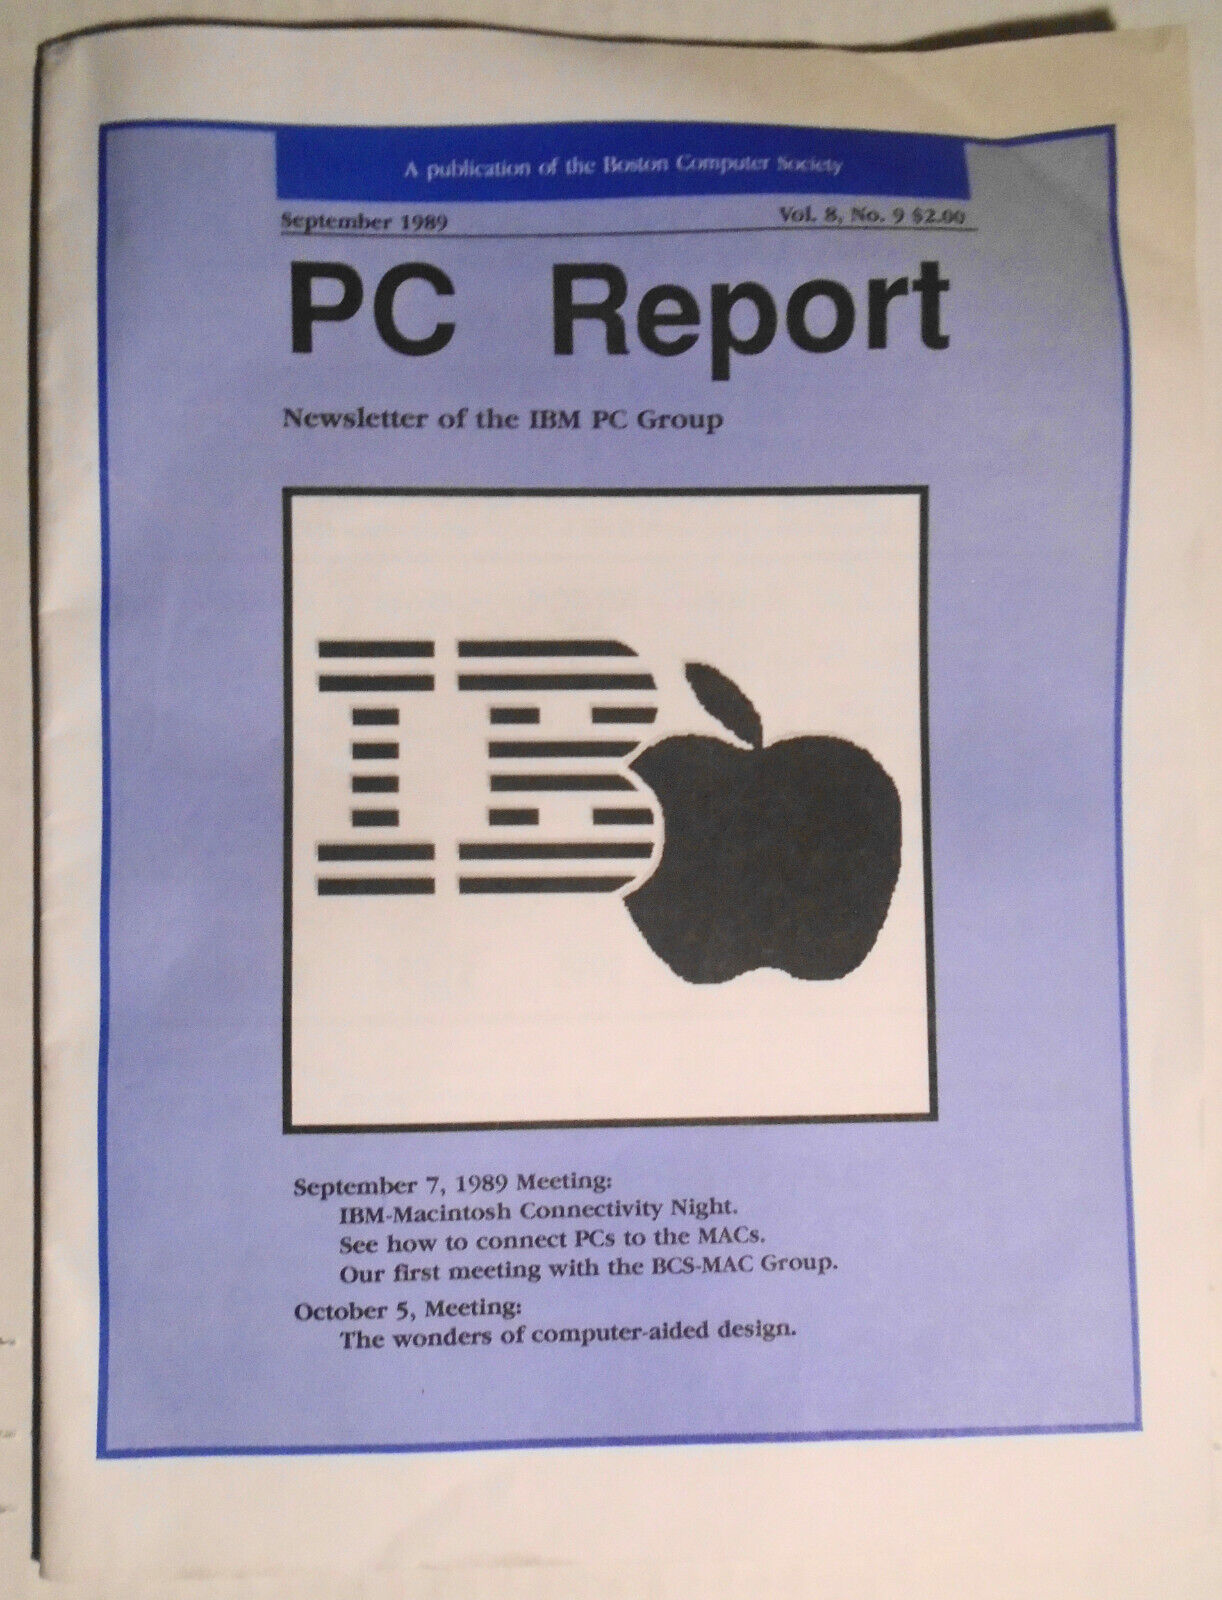 PC Report, September 1989 - a publication of the Boston Computer Society